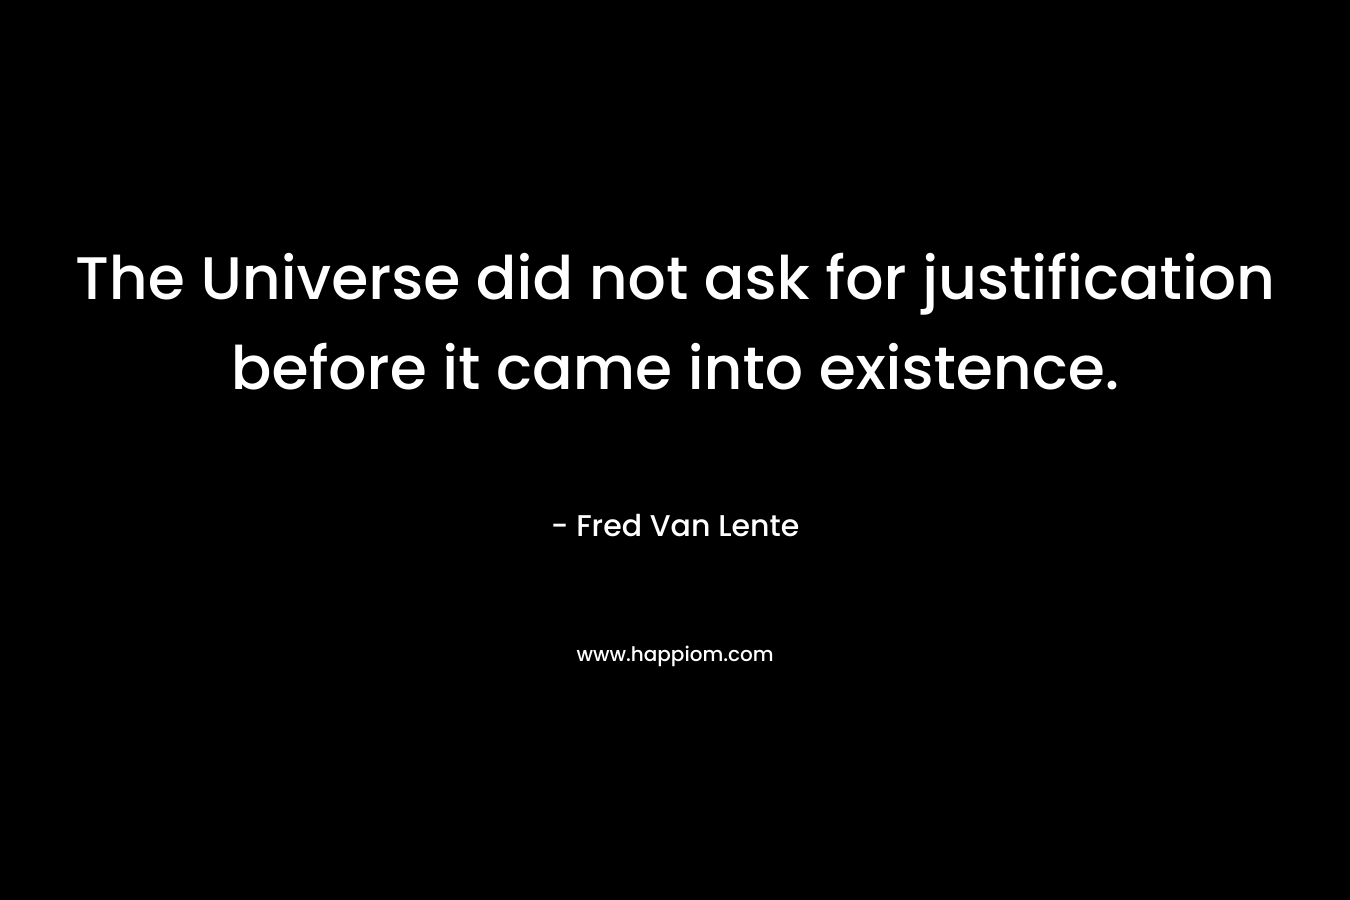 The Universe did not ask for justification before it came into existence.